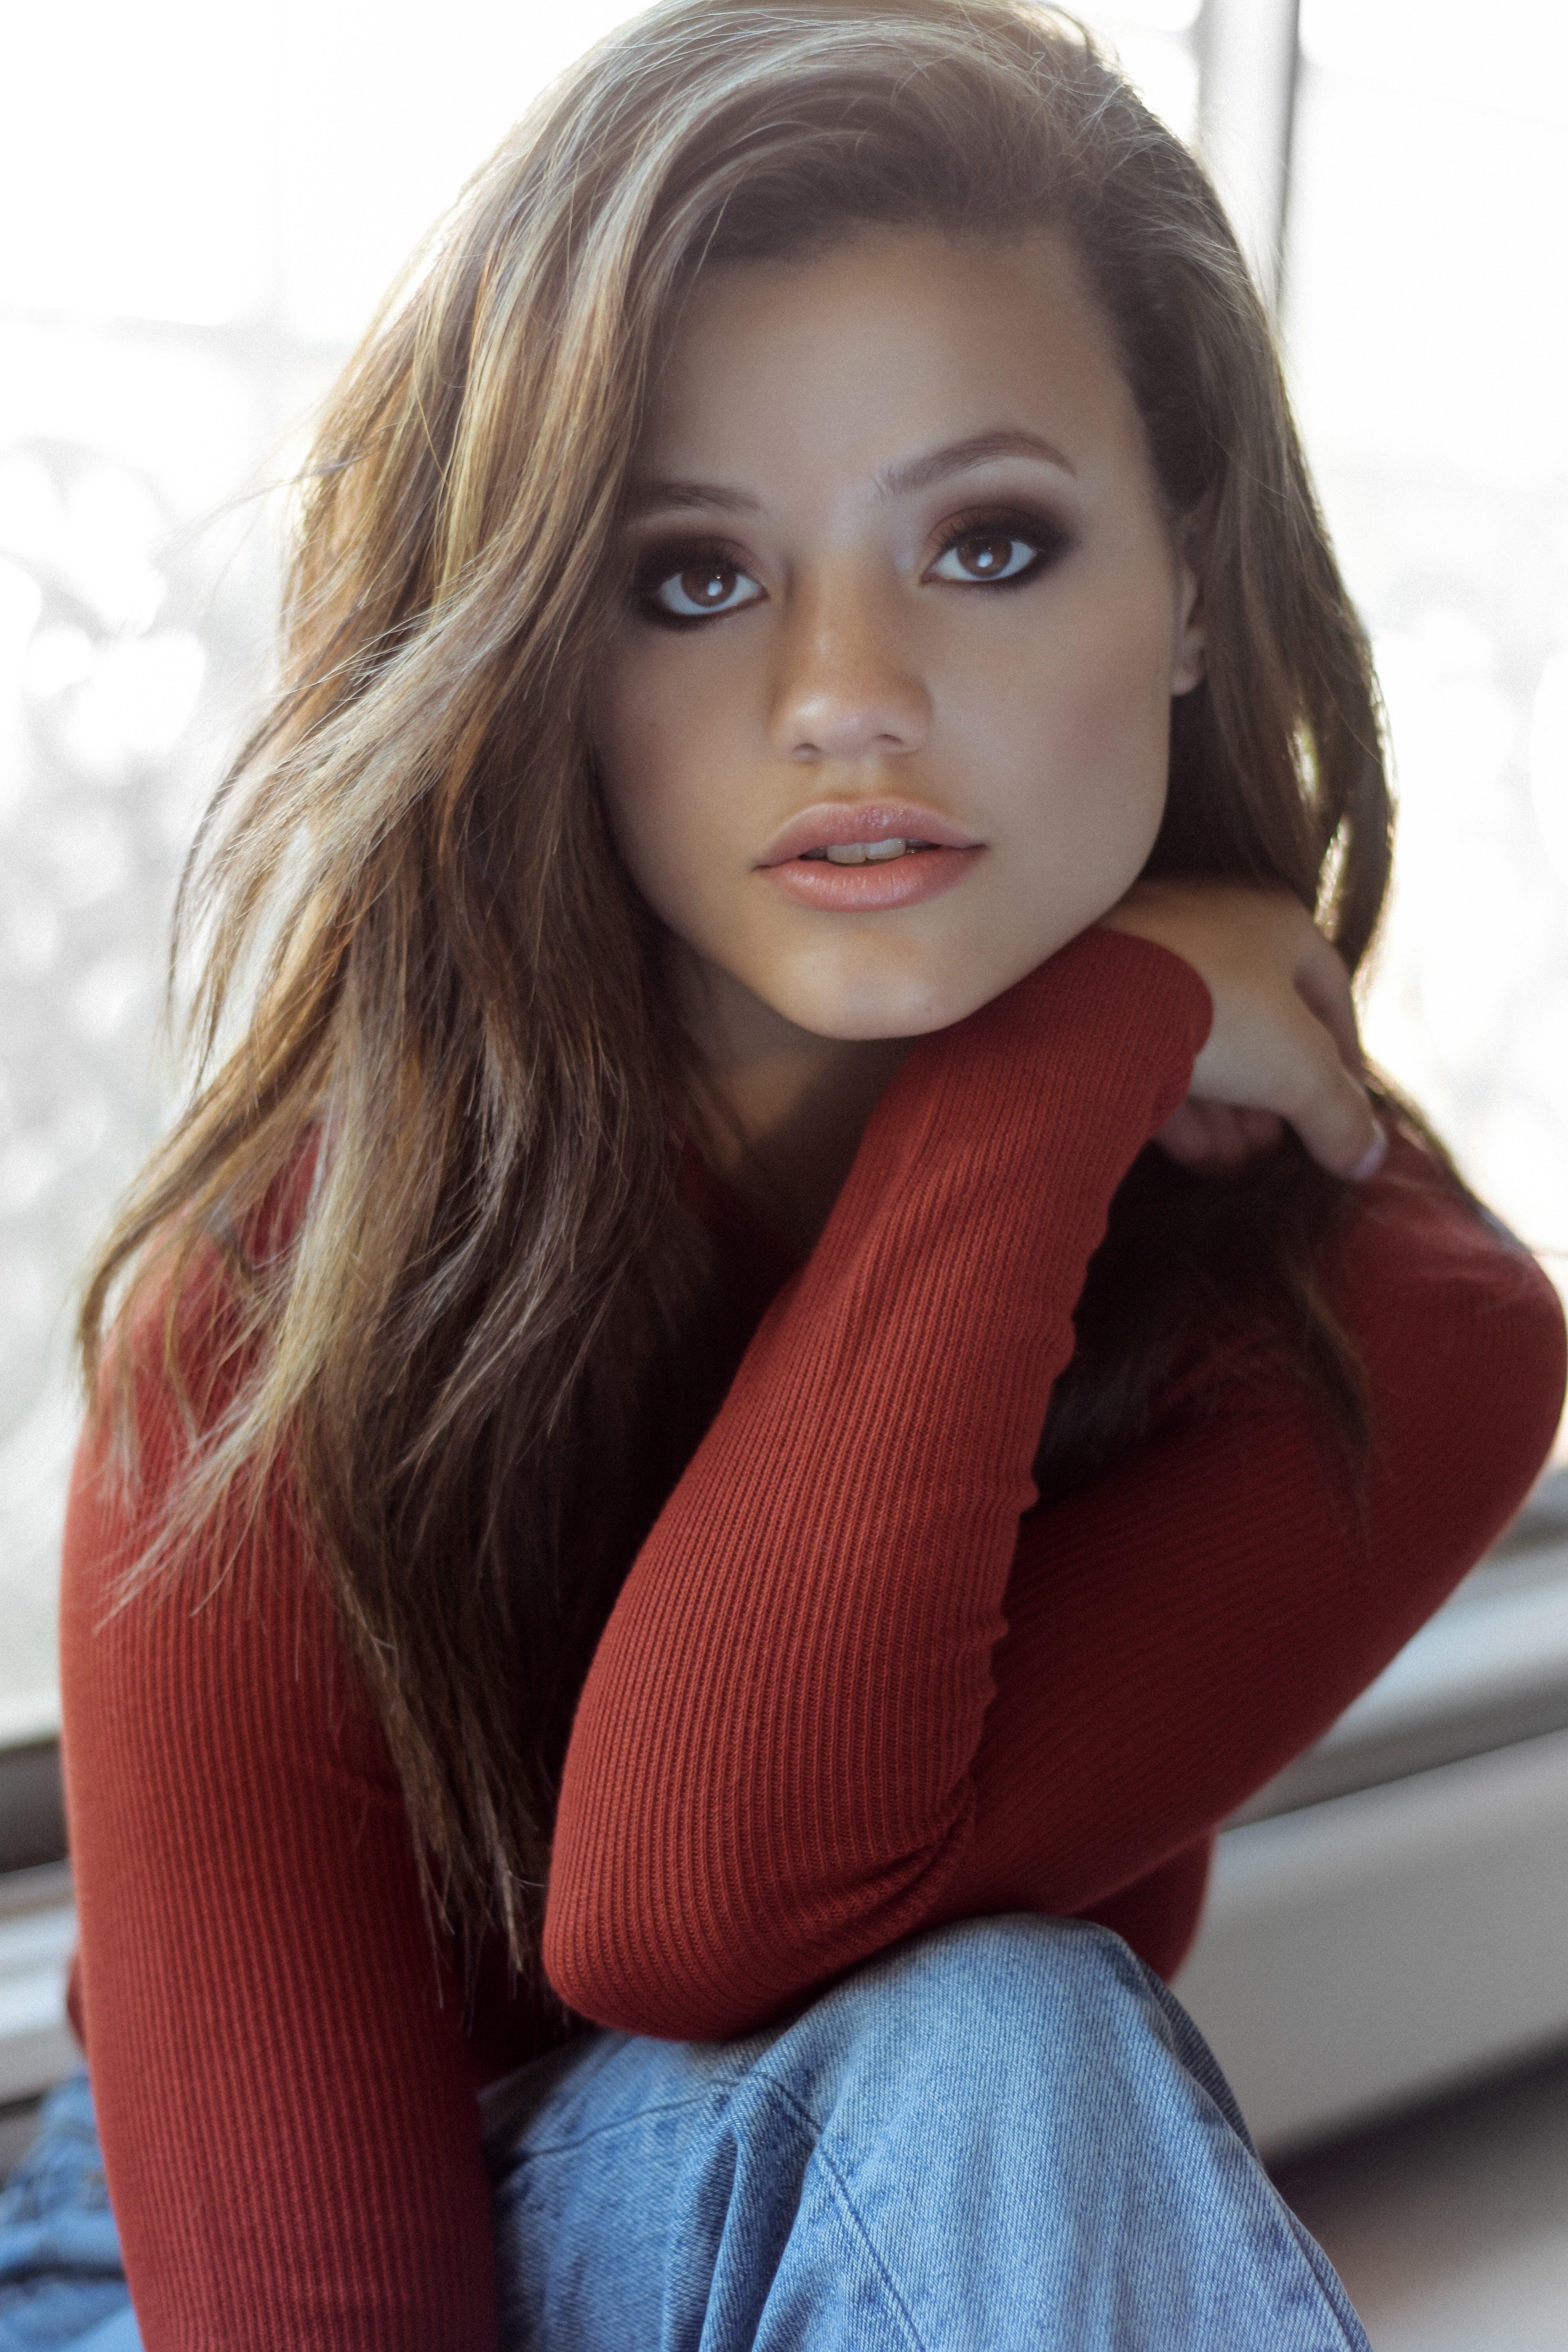 Charmed': Sarah Jeffery Cast As A Lead In The CW Reboot Pilot